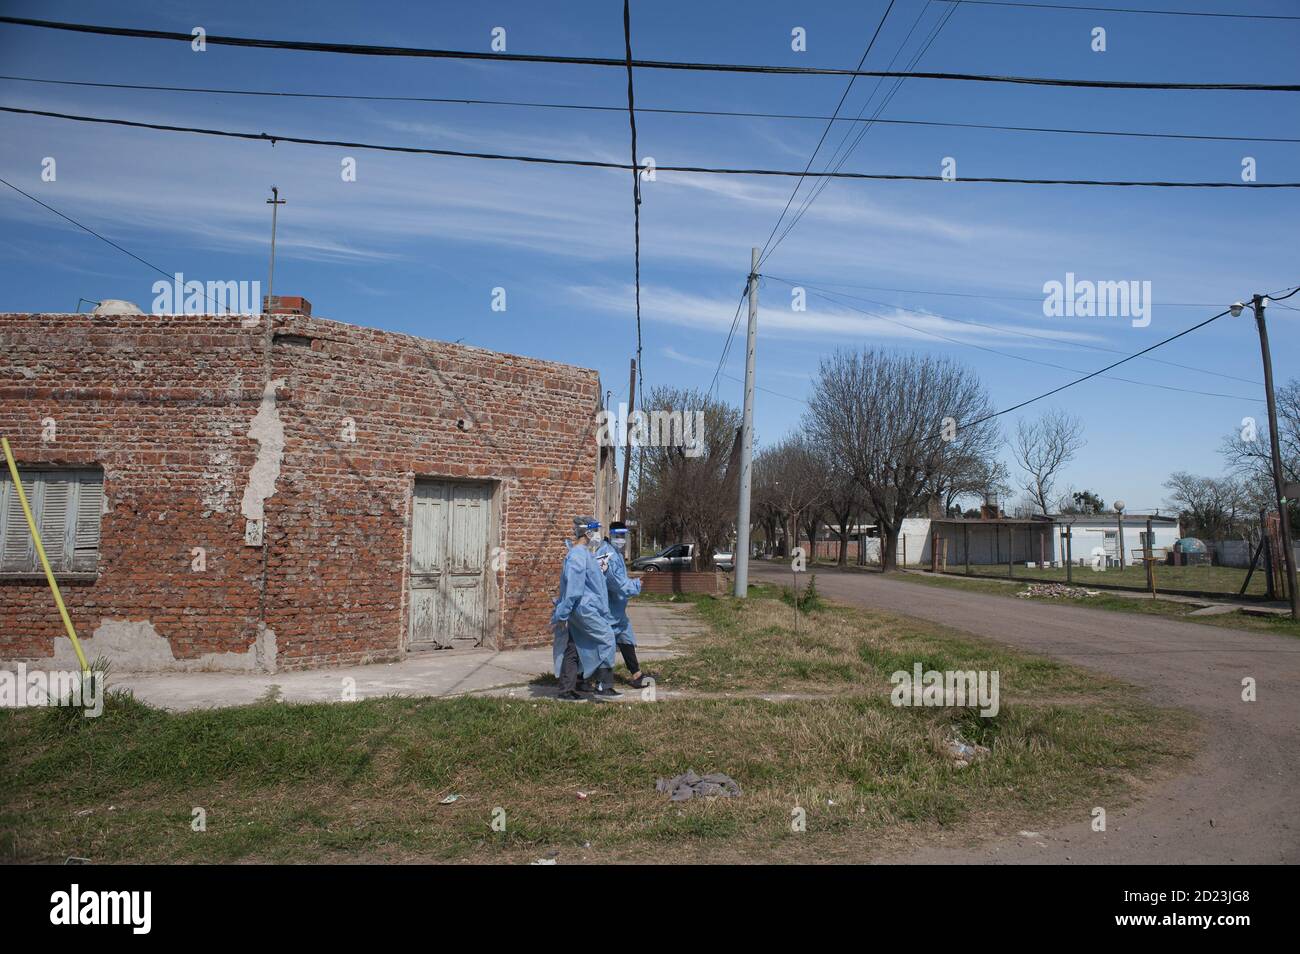 FIRMAT, ARGENTINA - Sep 17, 2020: Two volunteers walk house by house interviewing people to detect COVID-19 symptons and get them swabbed for confirma Stock Photo